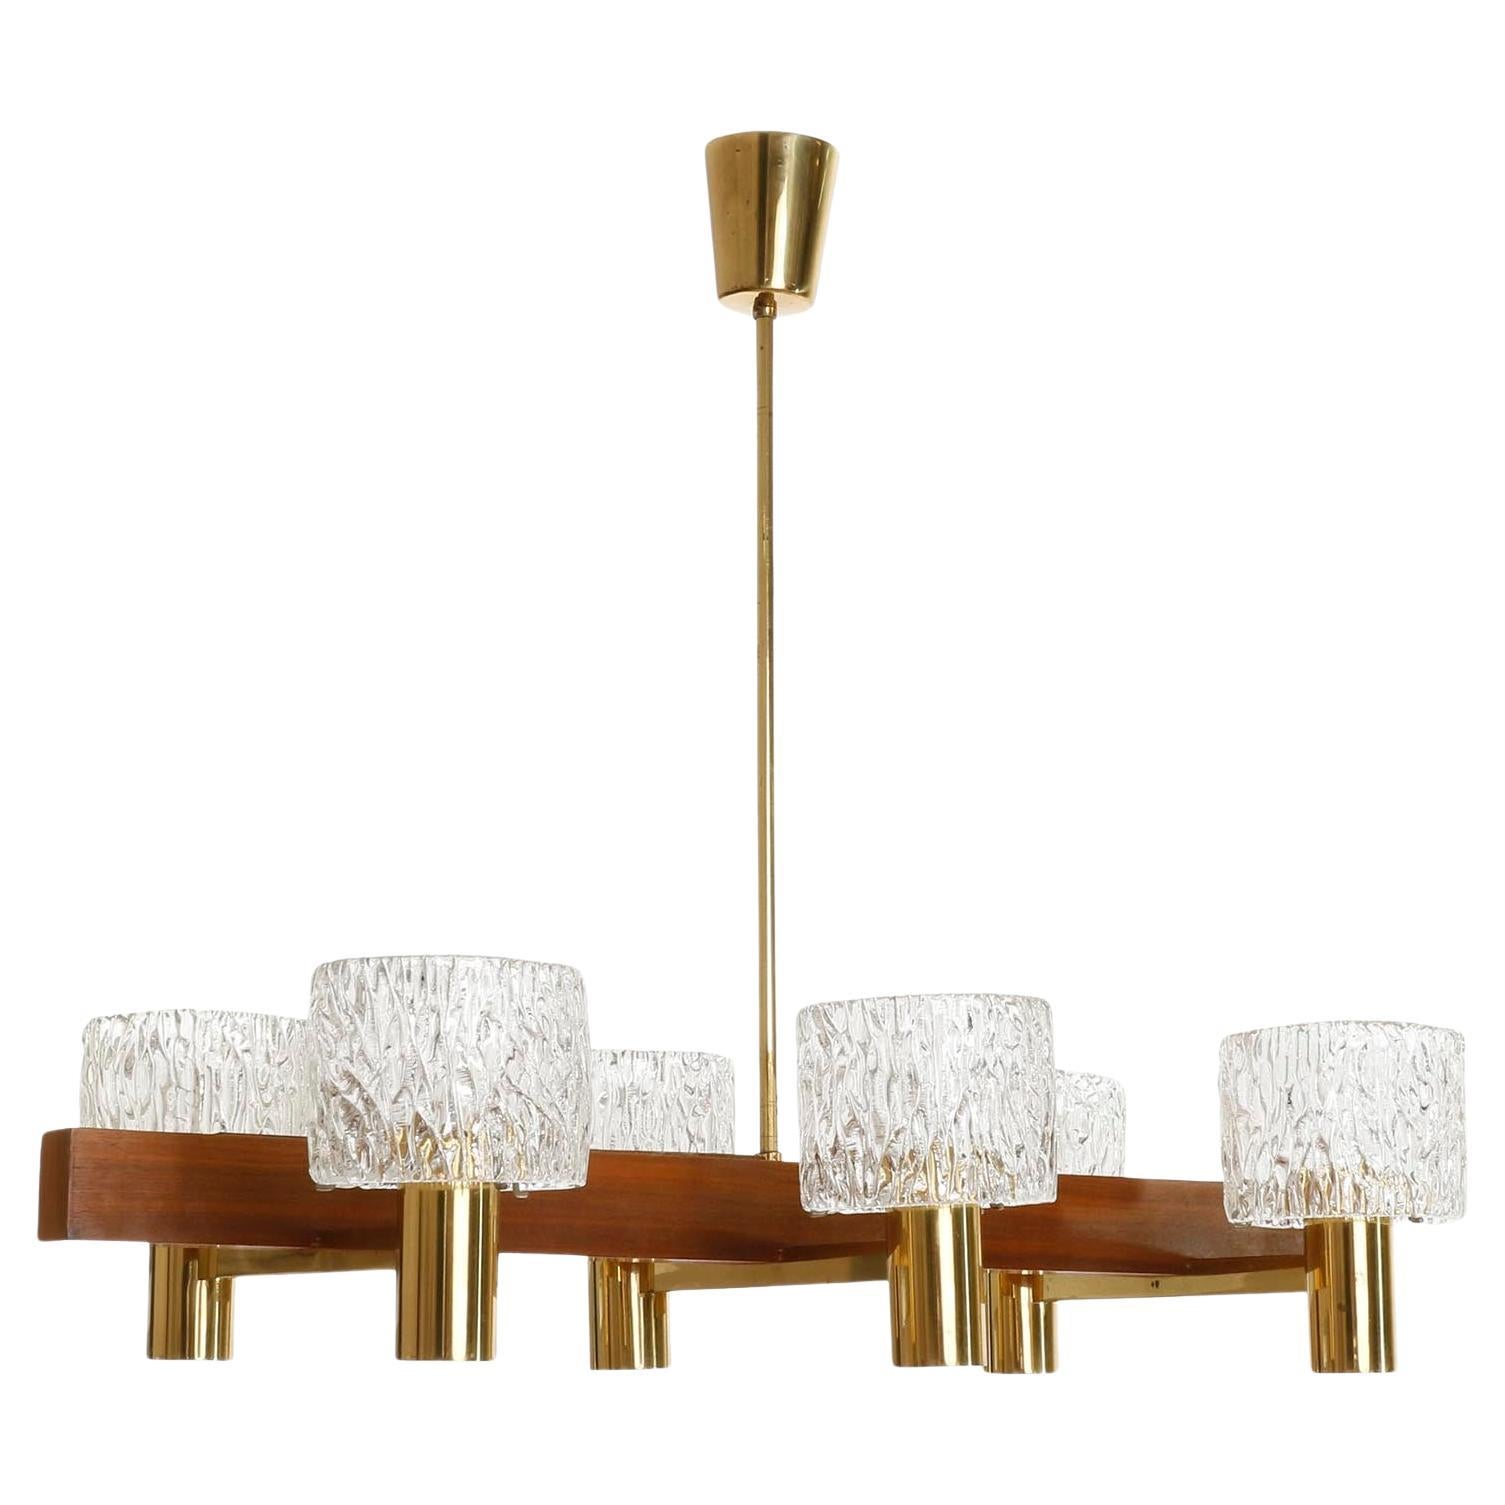 A six-arm chandelier by J.T. Kalmar, Vienna, manufacured in Mid-Century, circa 1960 (1950s or early 1960s). 
The fixture is made of a nice mixture of materials: textured clear glass lamp shades, brass and warm walnut wood.
The length of the rod can